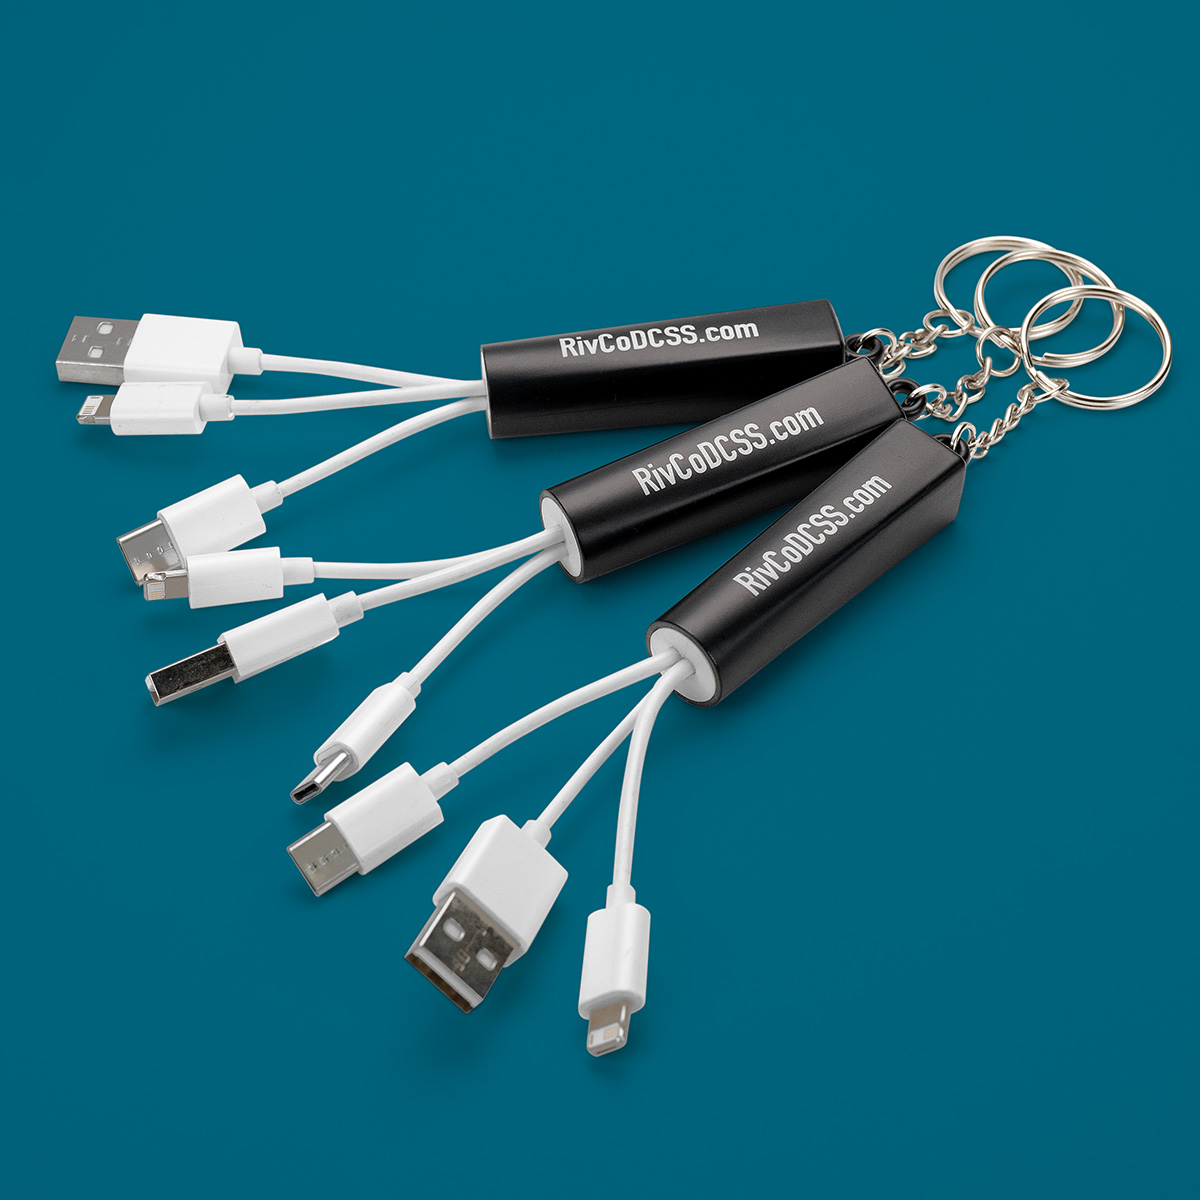 Promo Items: Custom Charging Cables